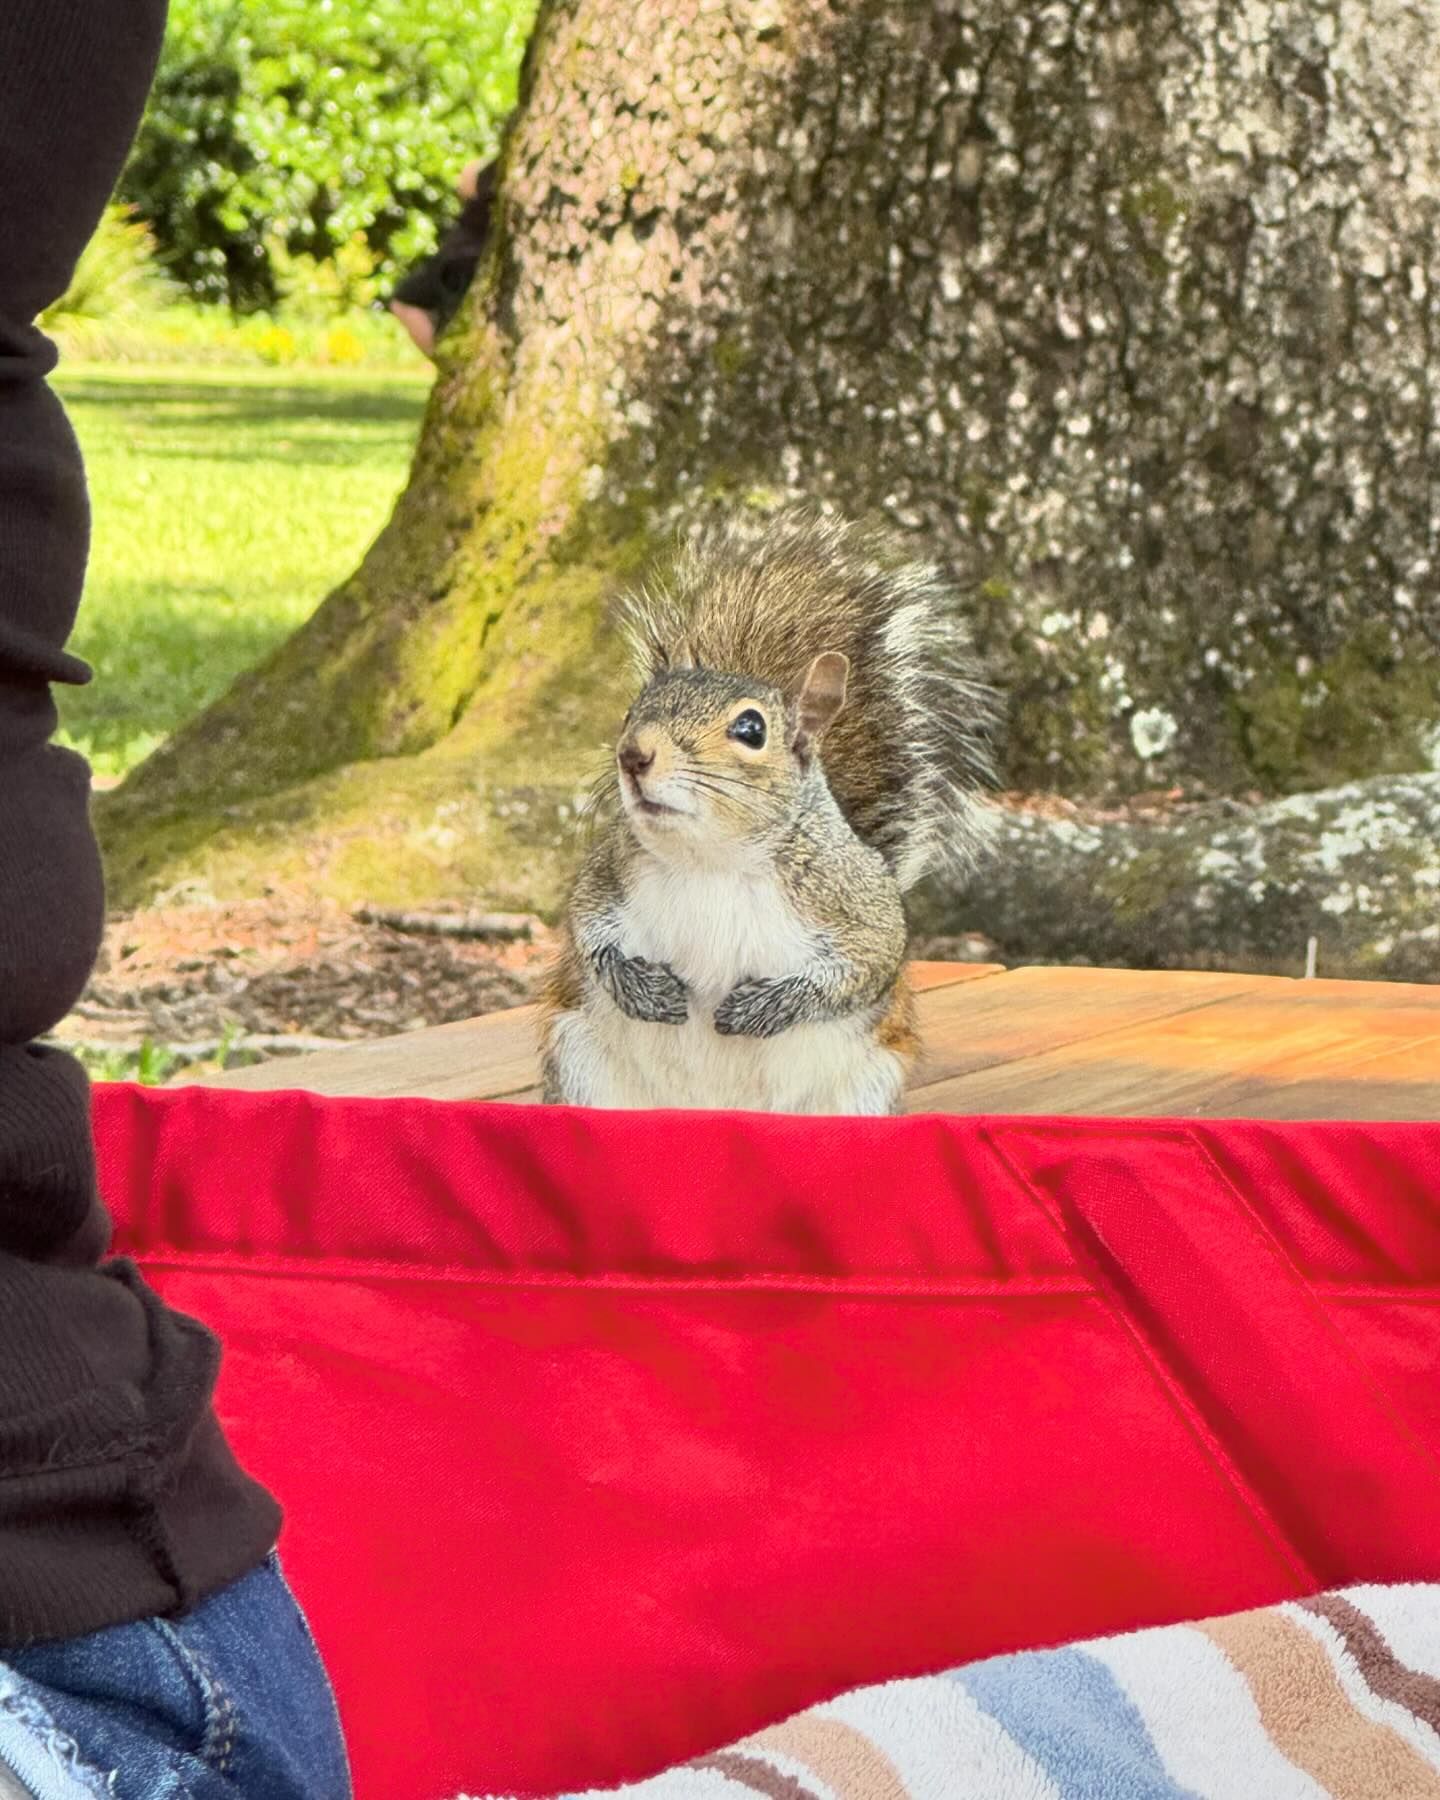 We made friends on our picnic. So cute 🖤
#squirrel